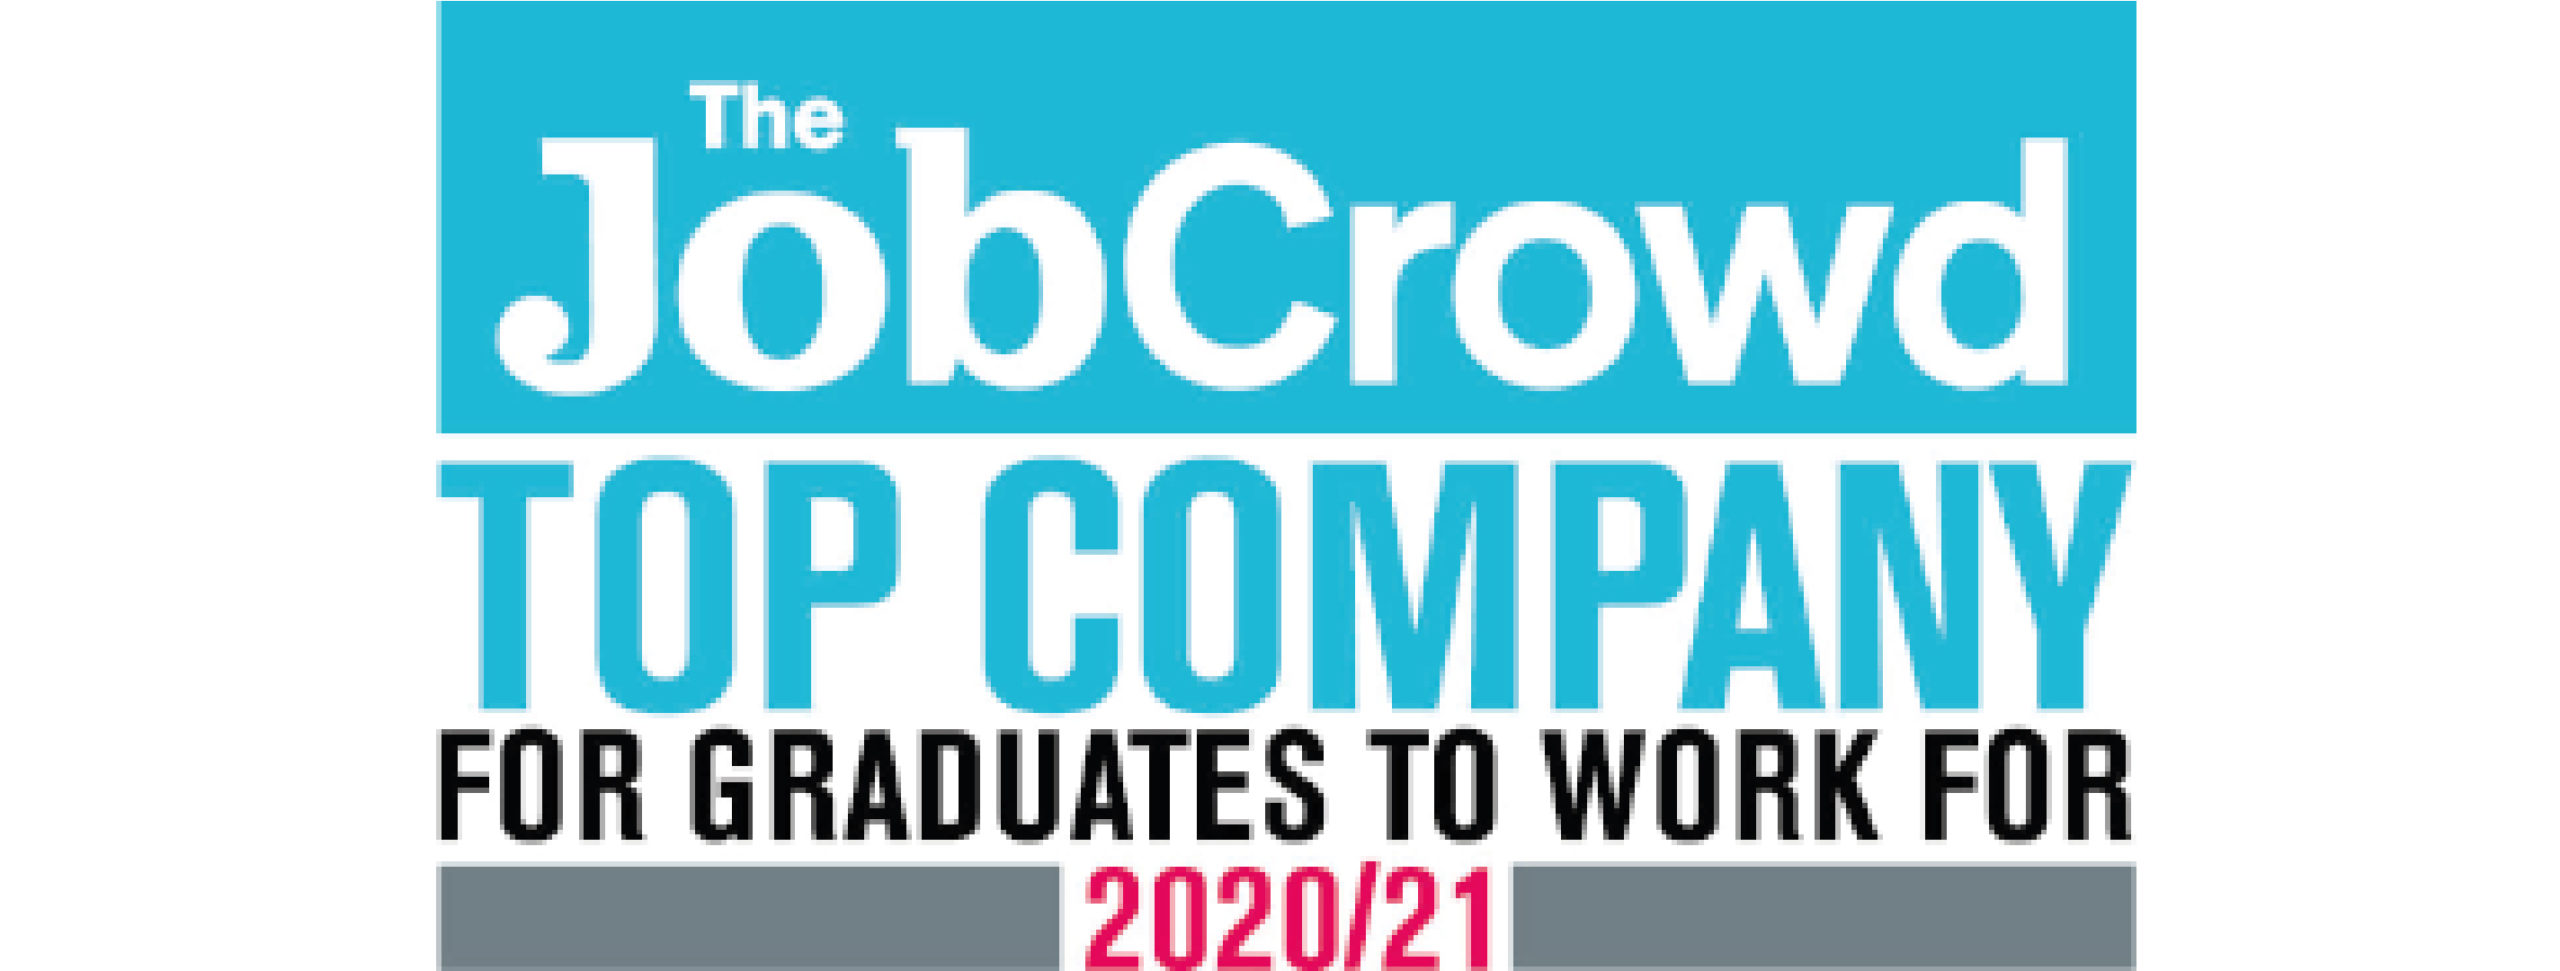 The Job Crowded Top company for graduates to work for 2020/21 poster